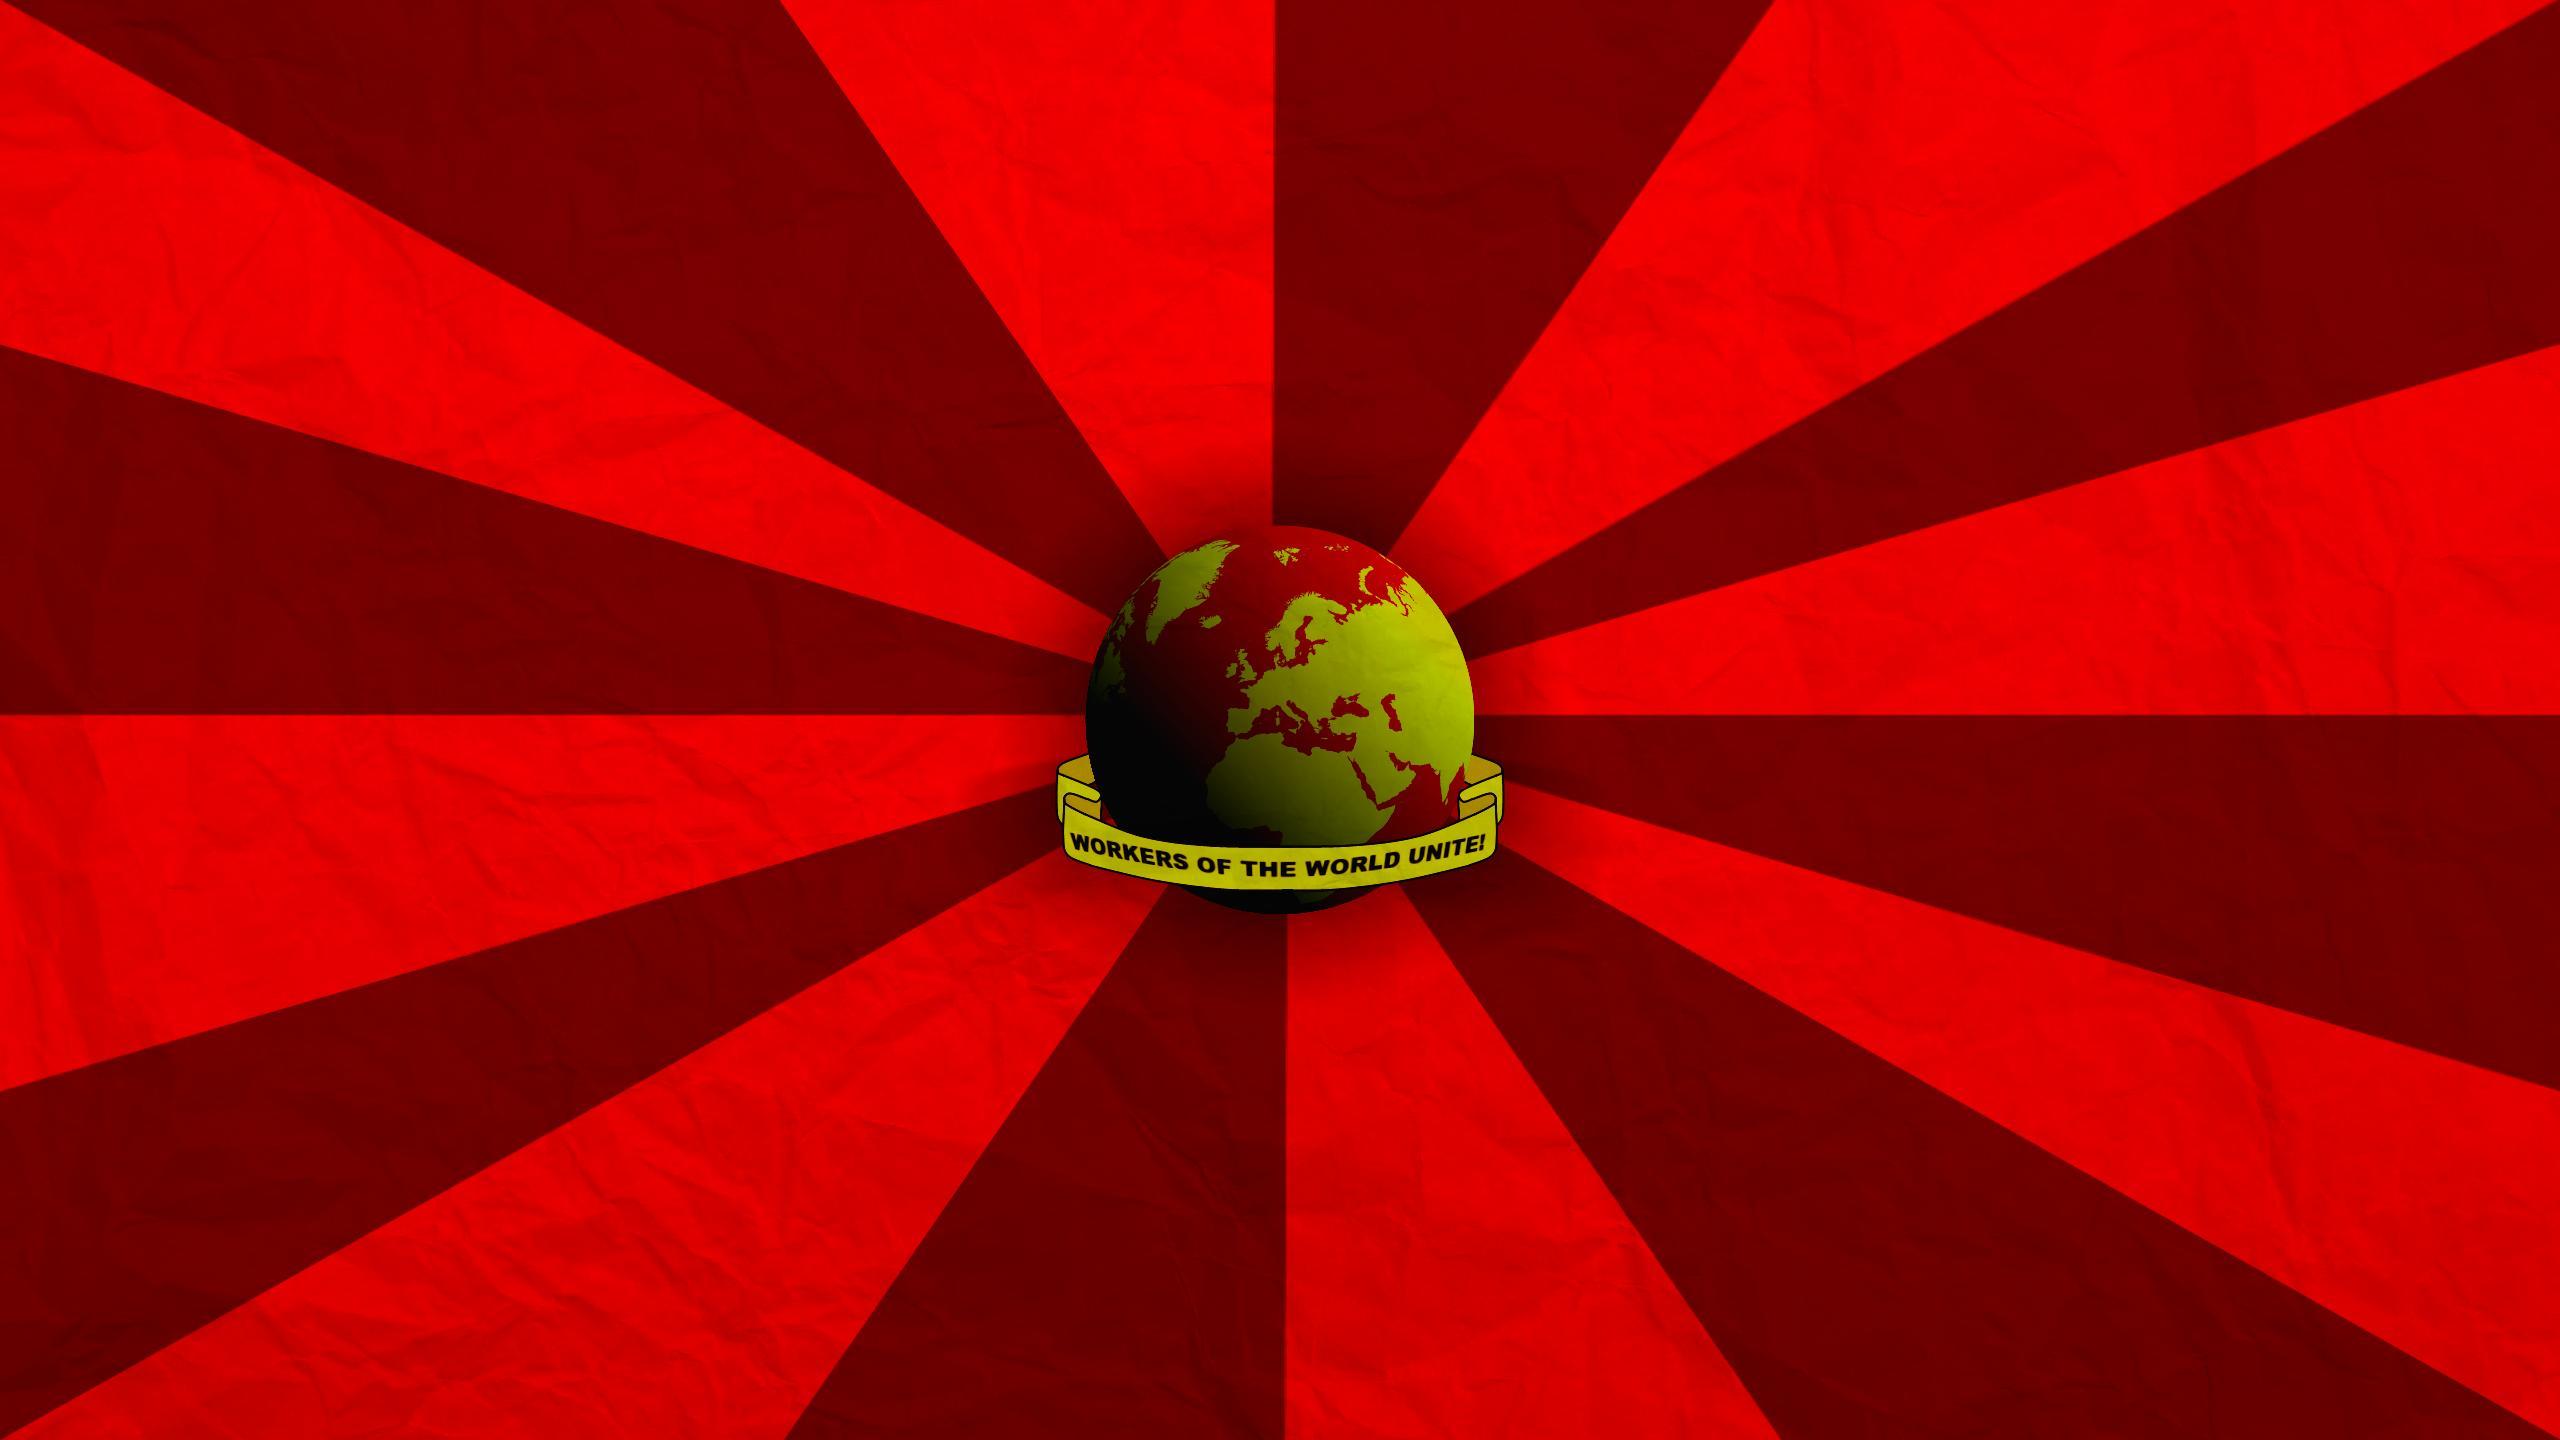 workers of the world unite wallpaper